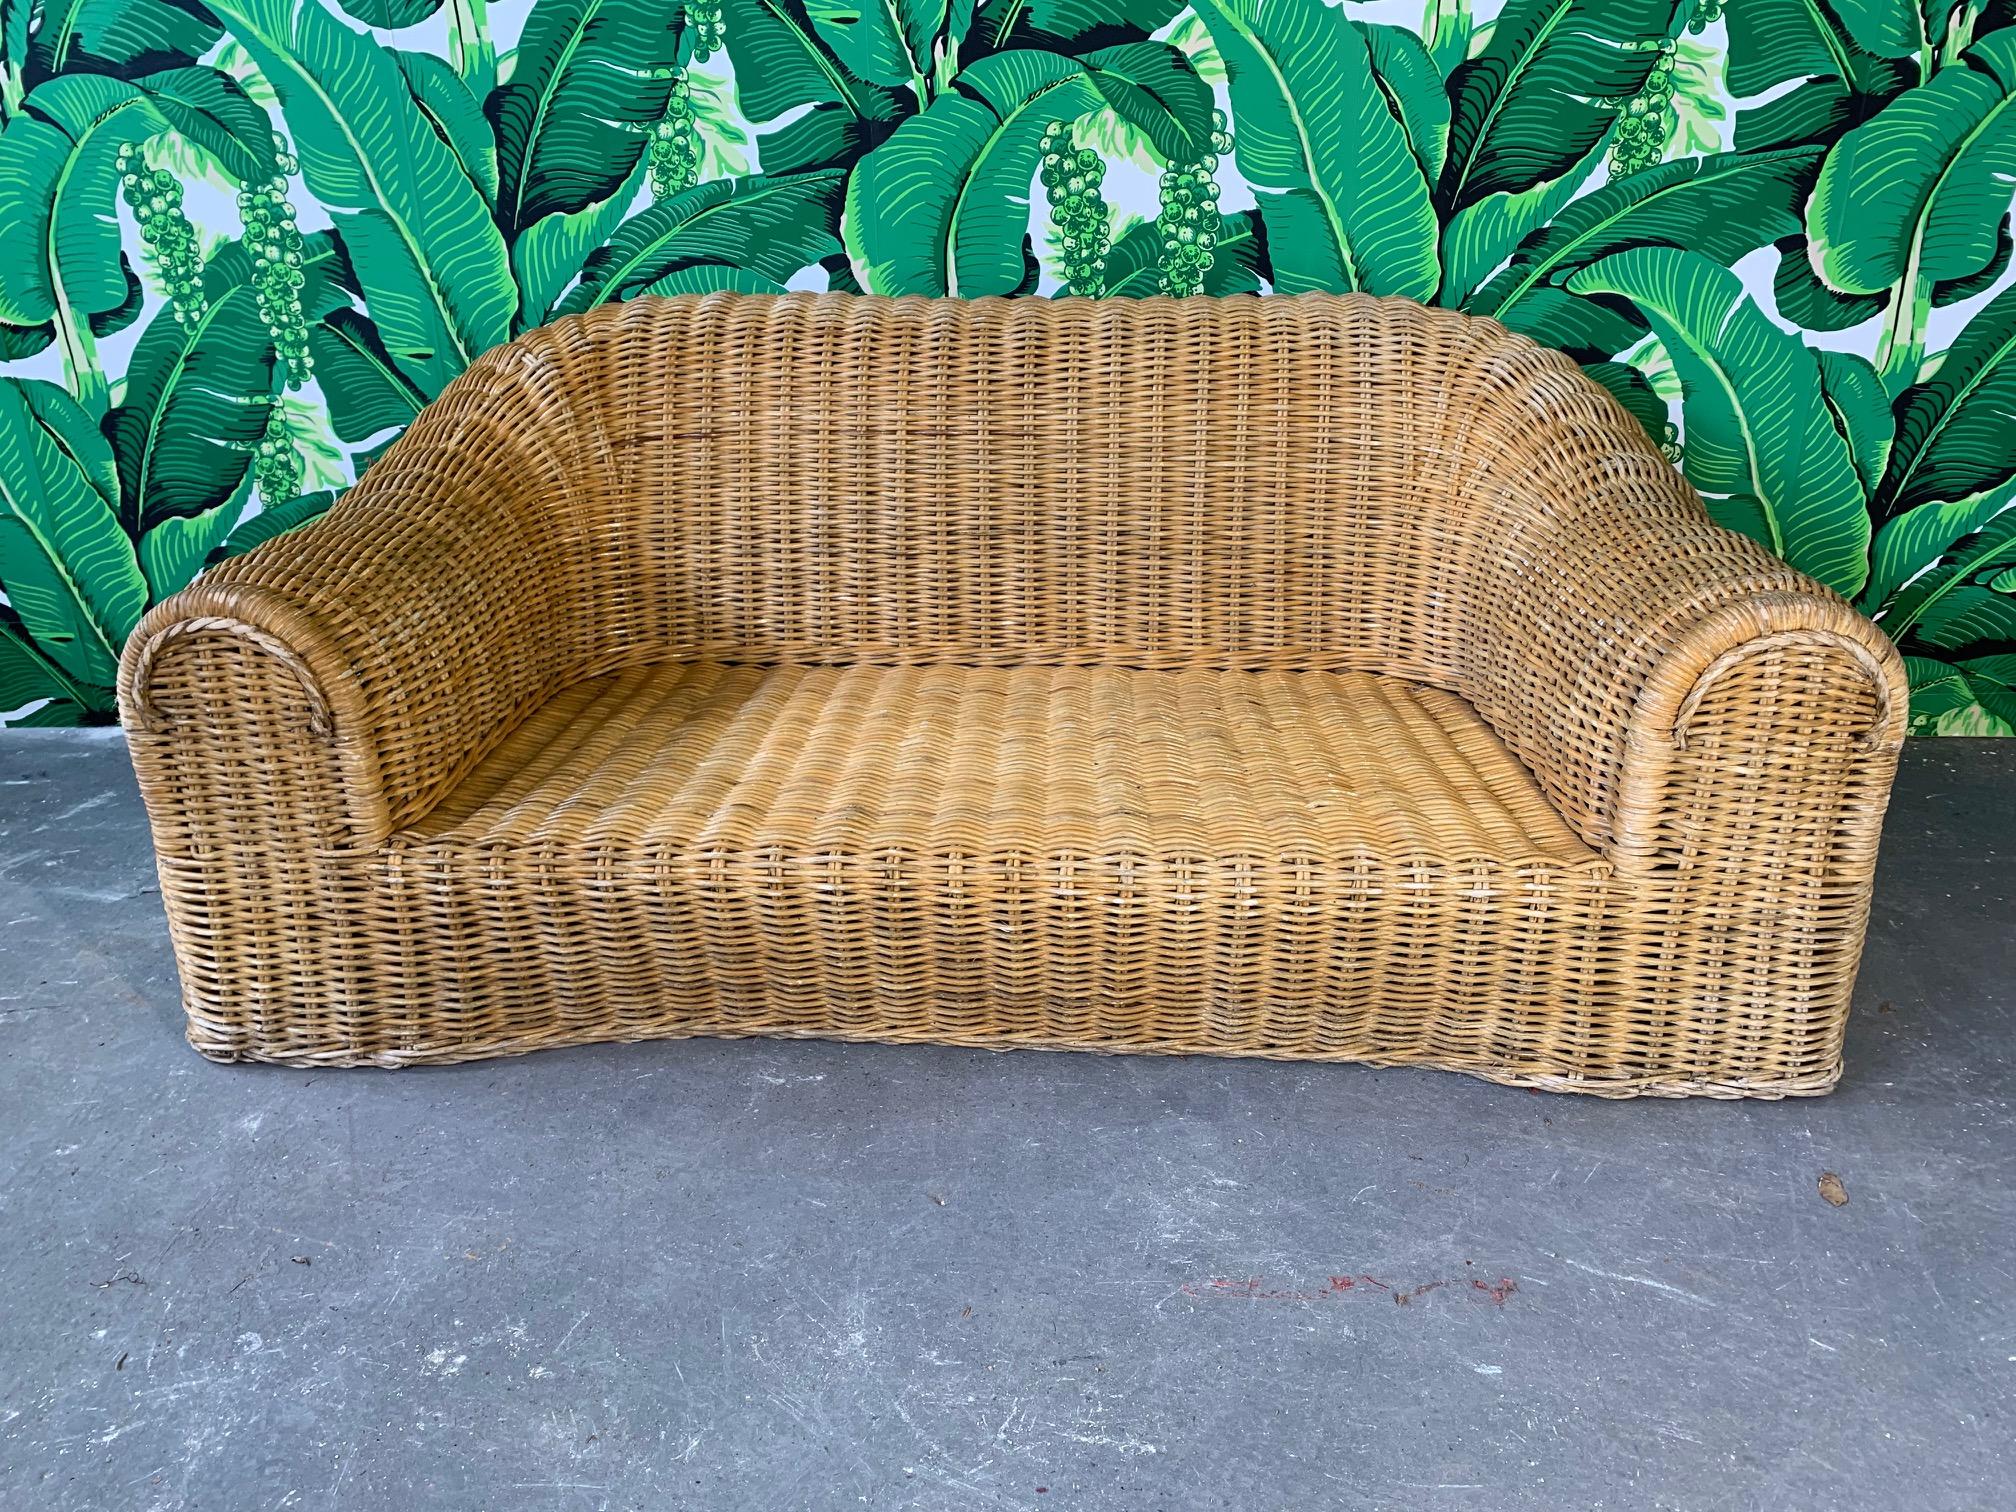 Sculptural wicker sofa in the manner of Michael Taylor or Eero Aarnio. Good vintage condition with minor imperfections consistent with age. Includes cushion (has staining) but no upholstery.